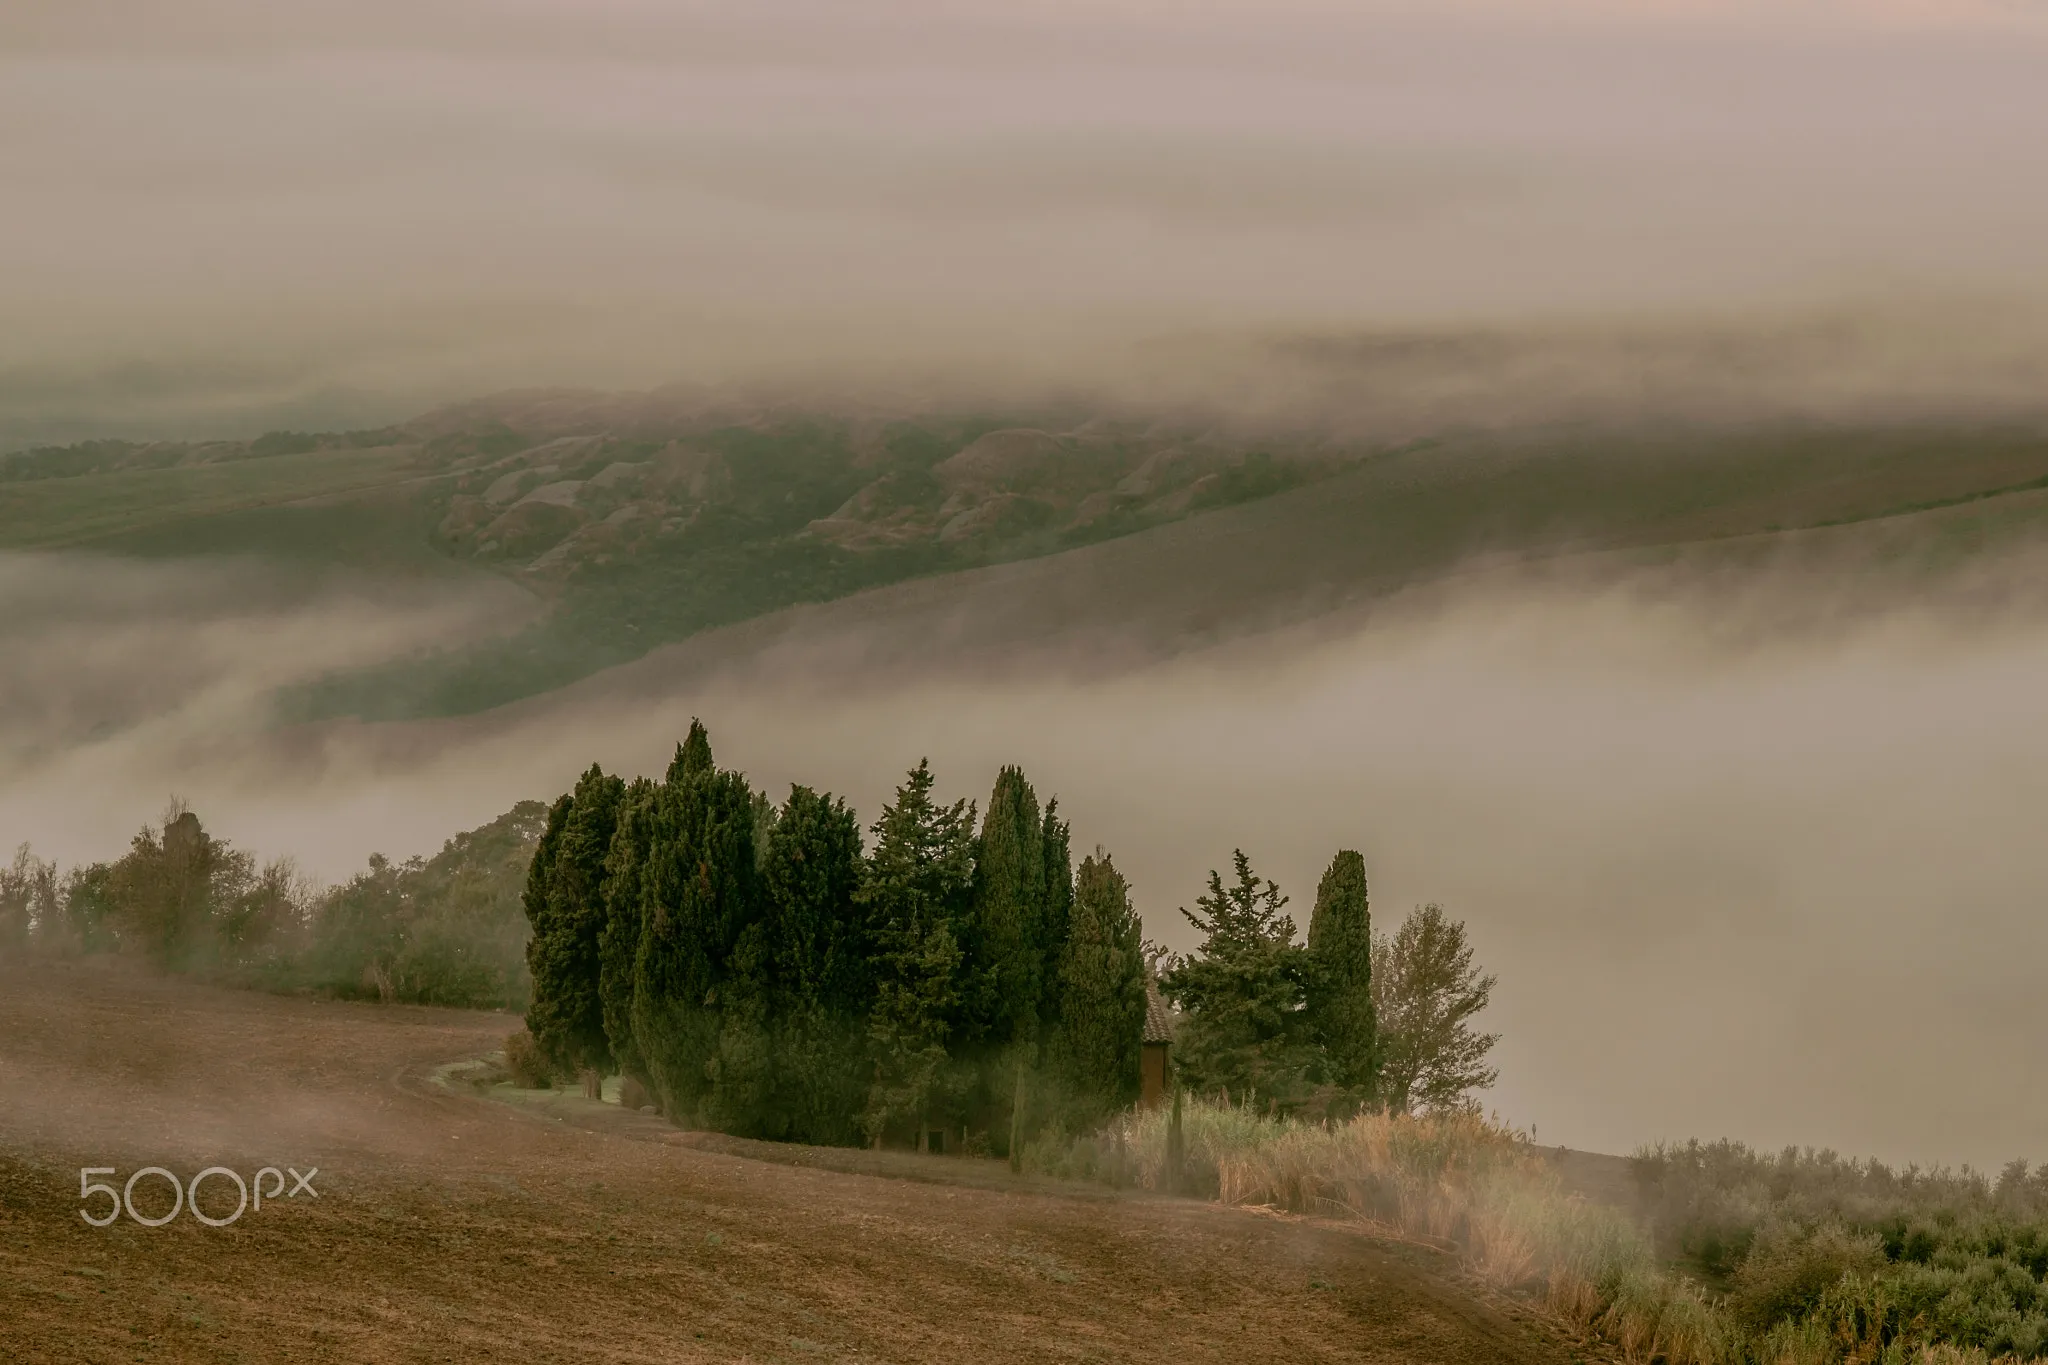 Photo showing: 500px provided description: La Foce Iii [#trees ,#fog ,#morning ,#travel ,#italy ,#colour ,#countryside ,#horizontal ,#tuscany ,#Landscape ,#Val d'Orcia ,#La Foce]